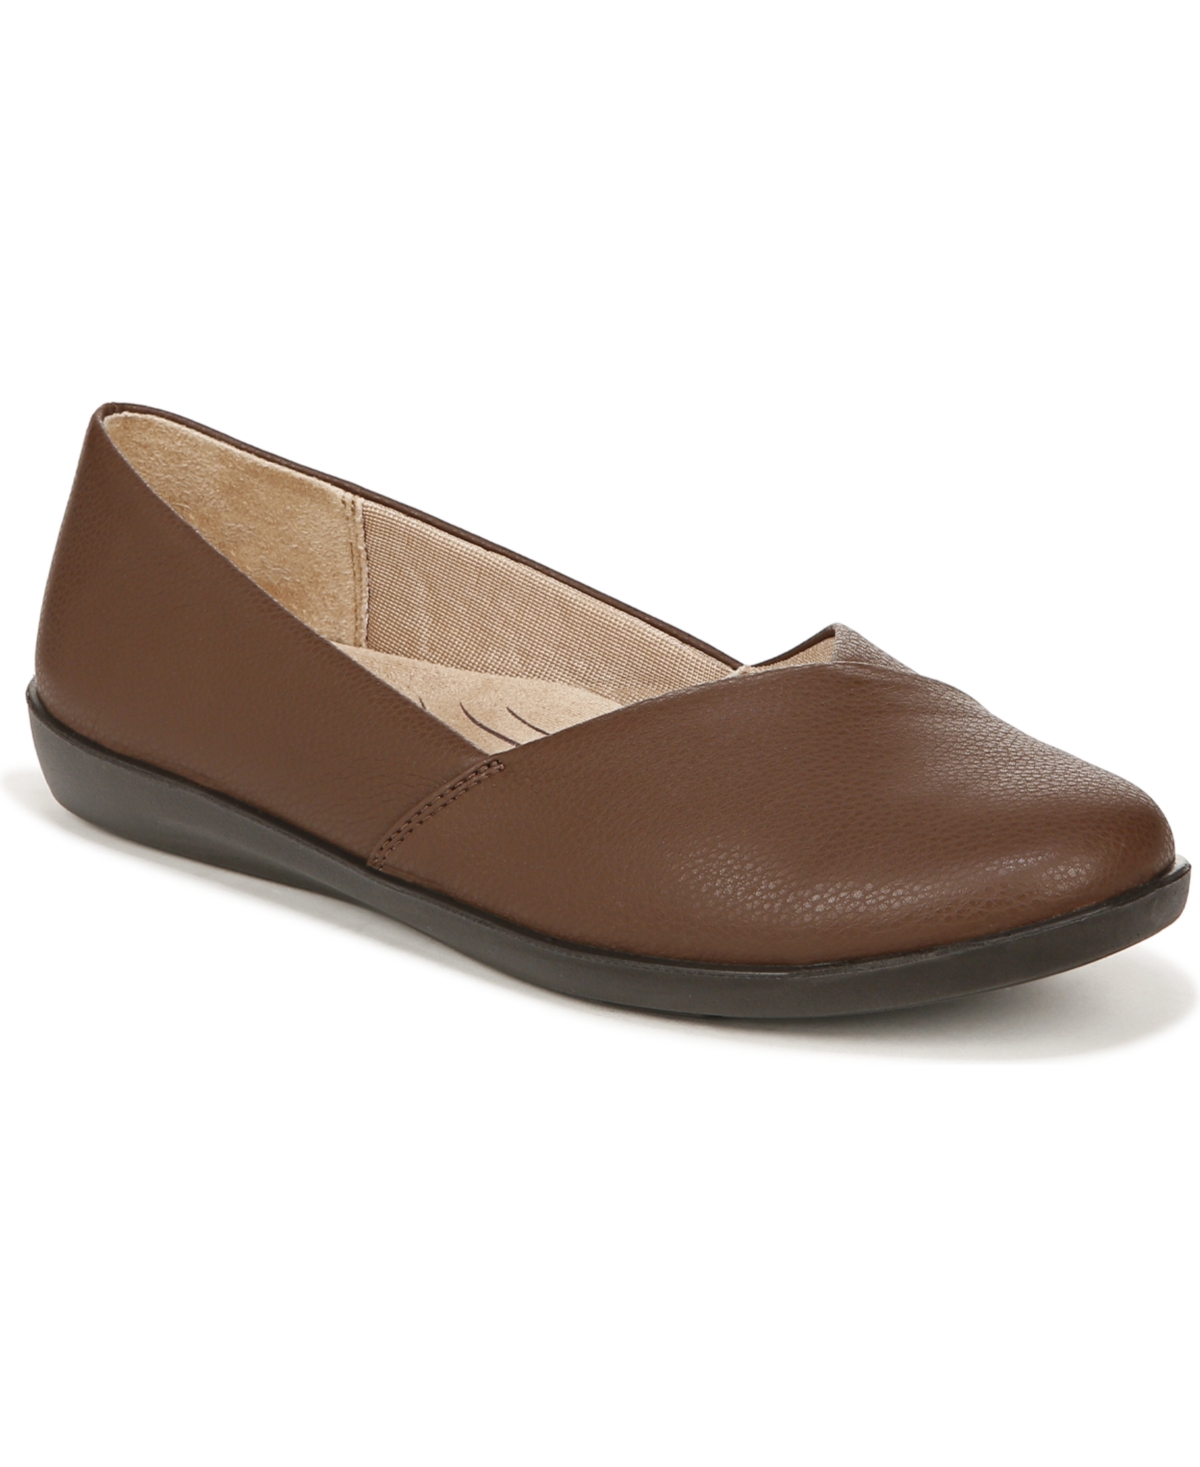 Notorious Flats - Dark Tan Faux Leather